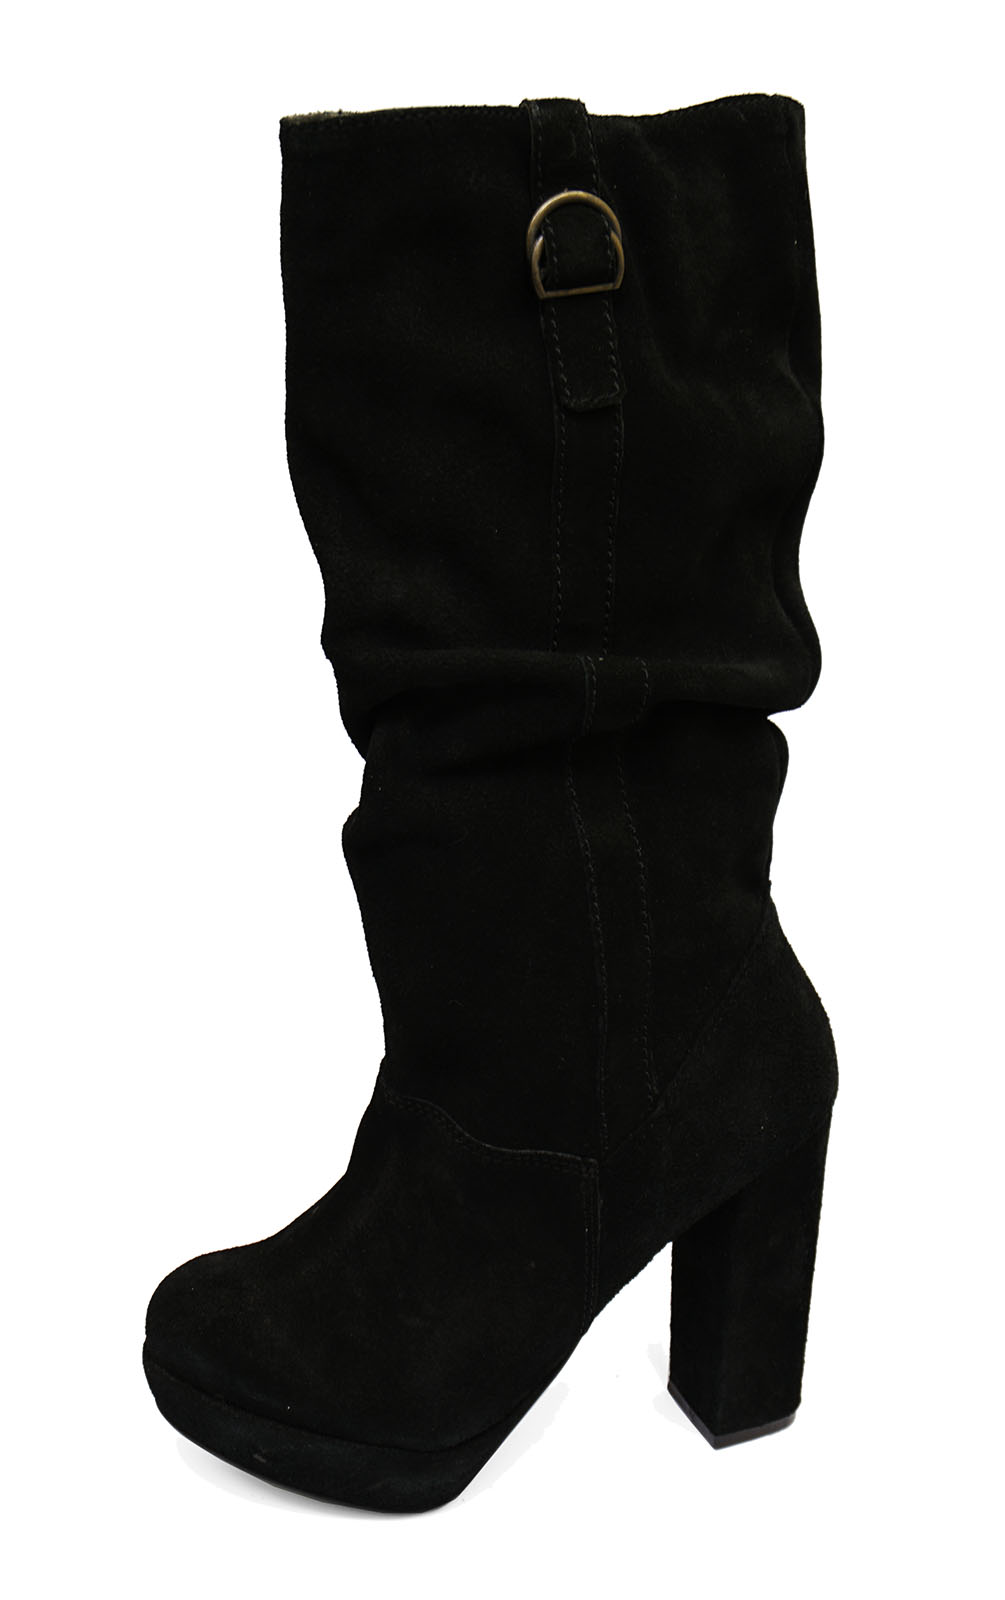 WOMENS BLACK GENUINE SUEDE KNEE-HIGH SLOUCH PLATFORM RUCHED BOOTS SIZES ...